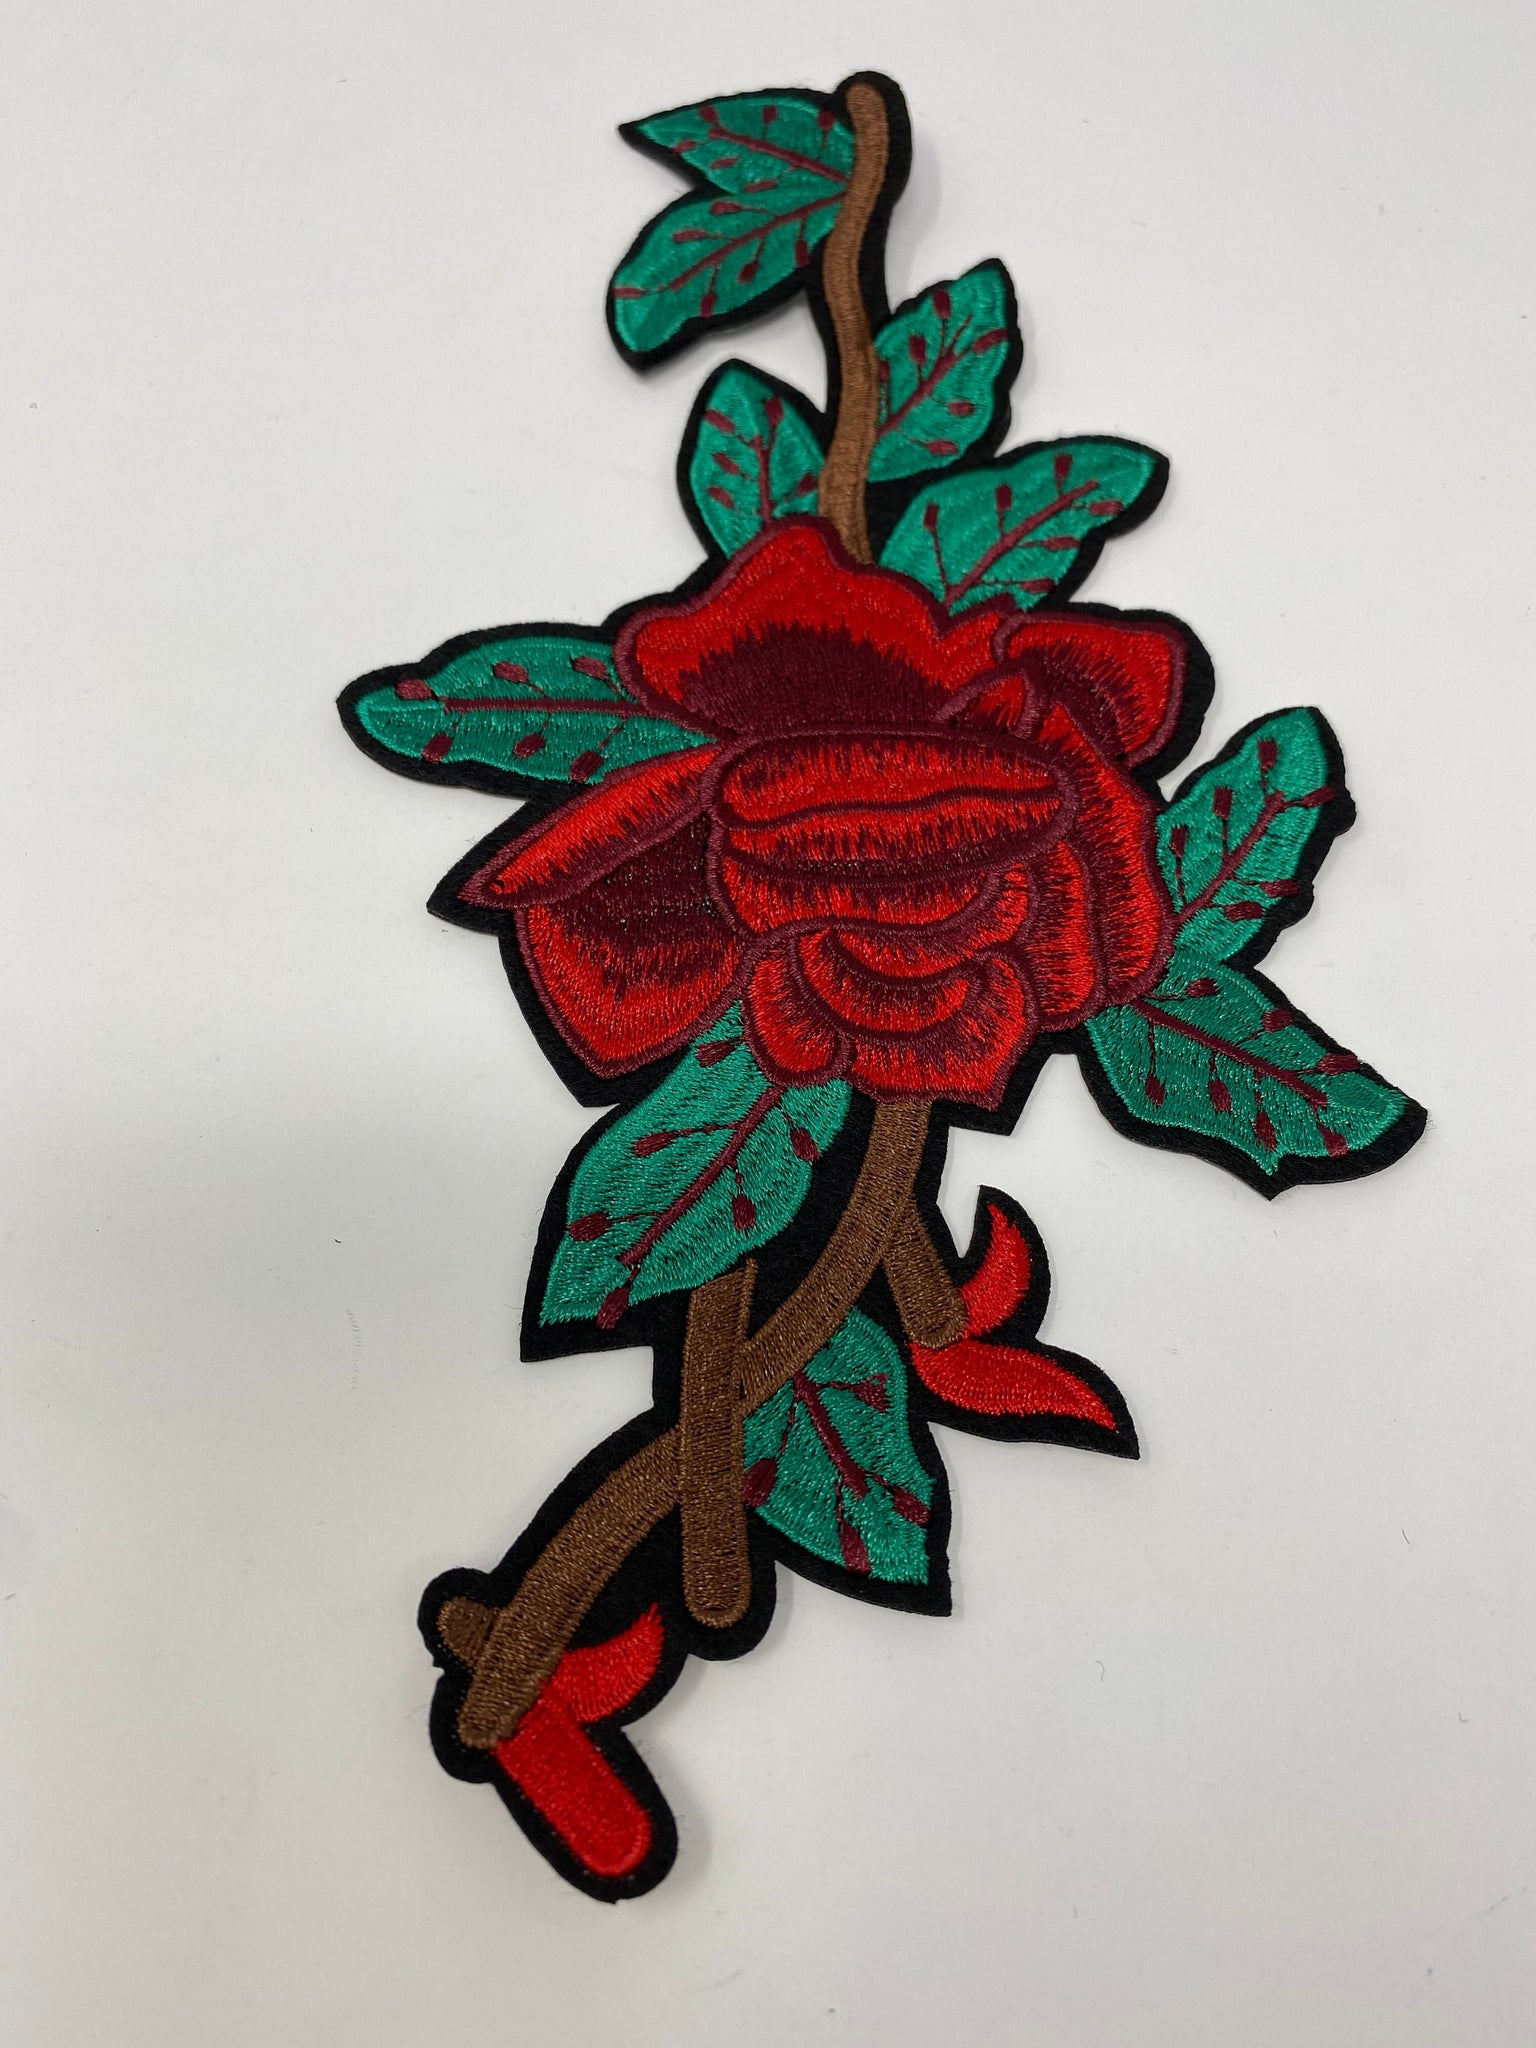 U-Sky Sew or Iron on Patches - Cute Red Flower Rose Patch for Clothing,  Backpacks - Pack of 3pcs - Size:2.7x2.1inch